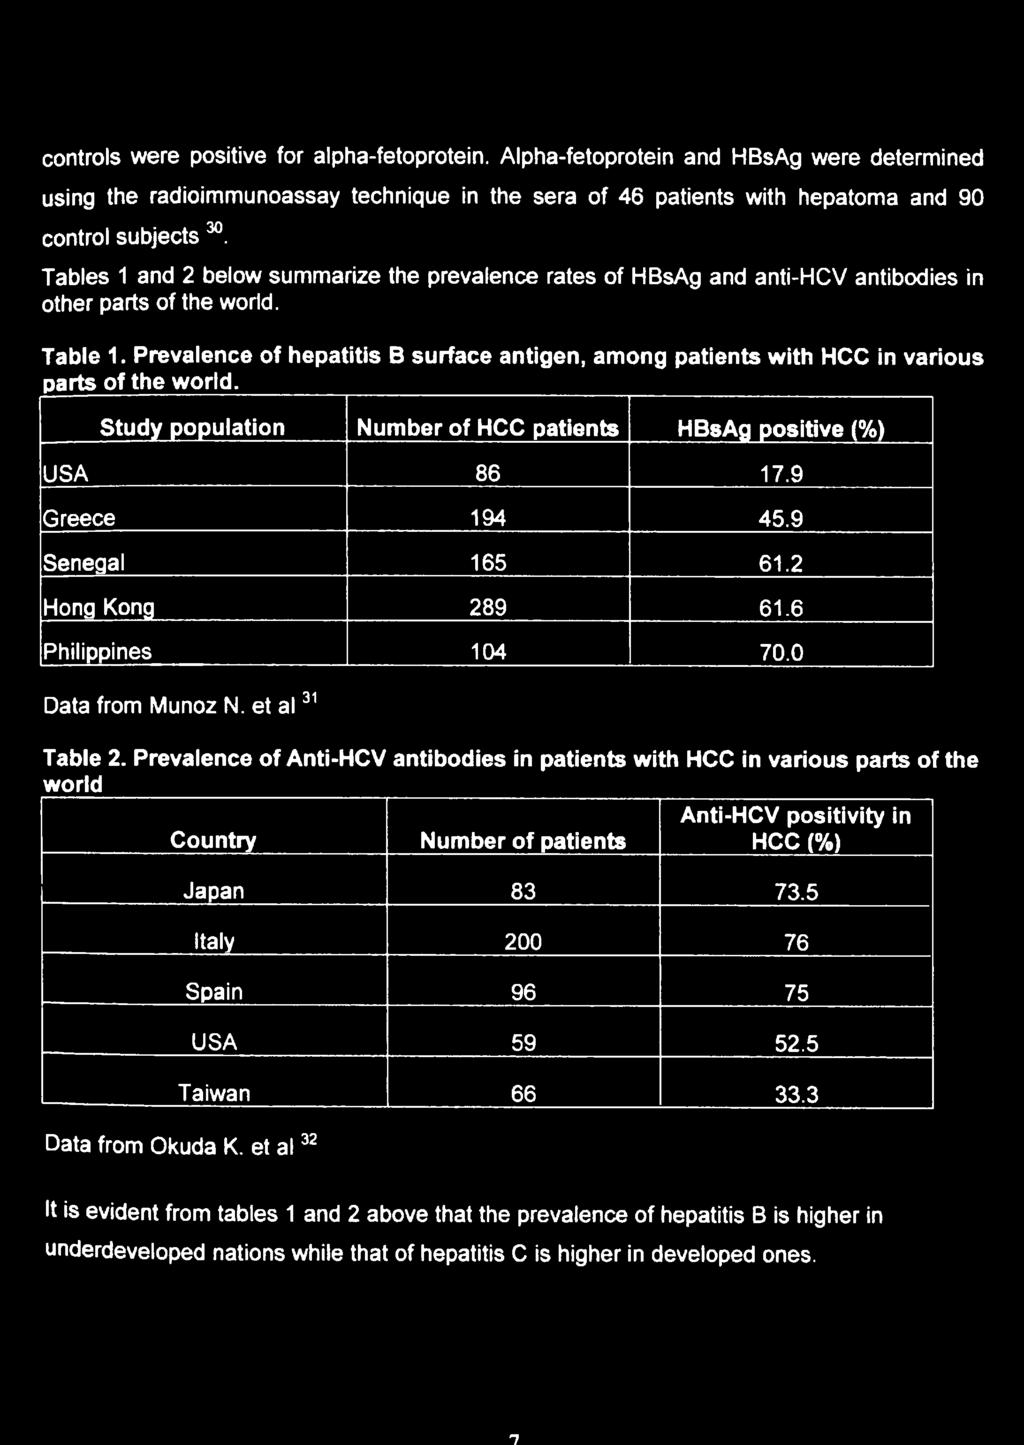 Prevalence of hepatitis B surface antigen, among patients with HCC in various parts of the world. Study population Number of HCC patients HBsAg positive (%) USA 86 17.9 Greece 194 45.9 Senegal 165 61.